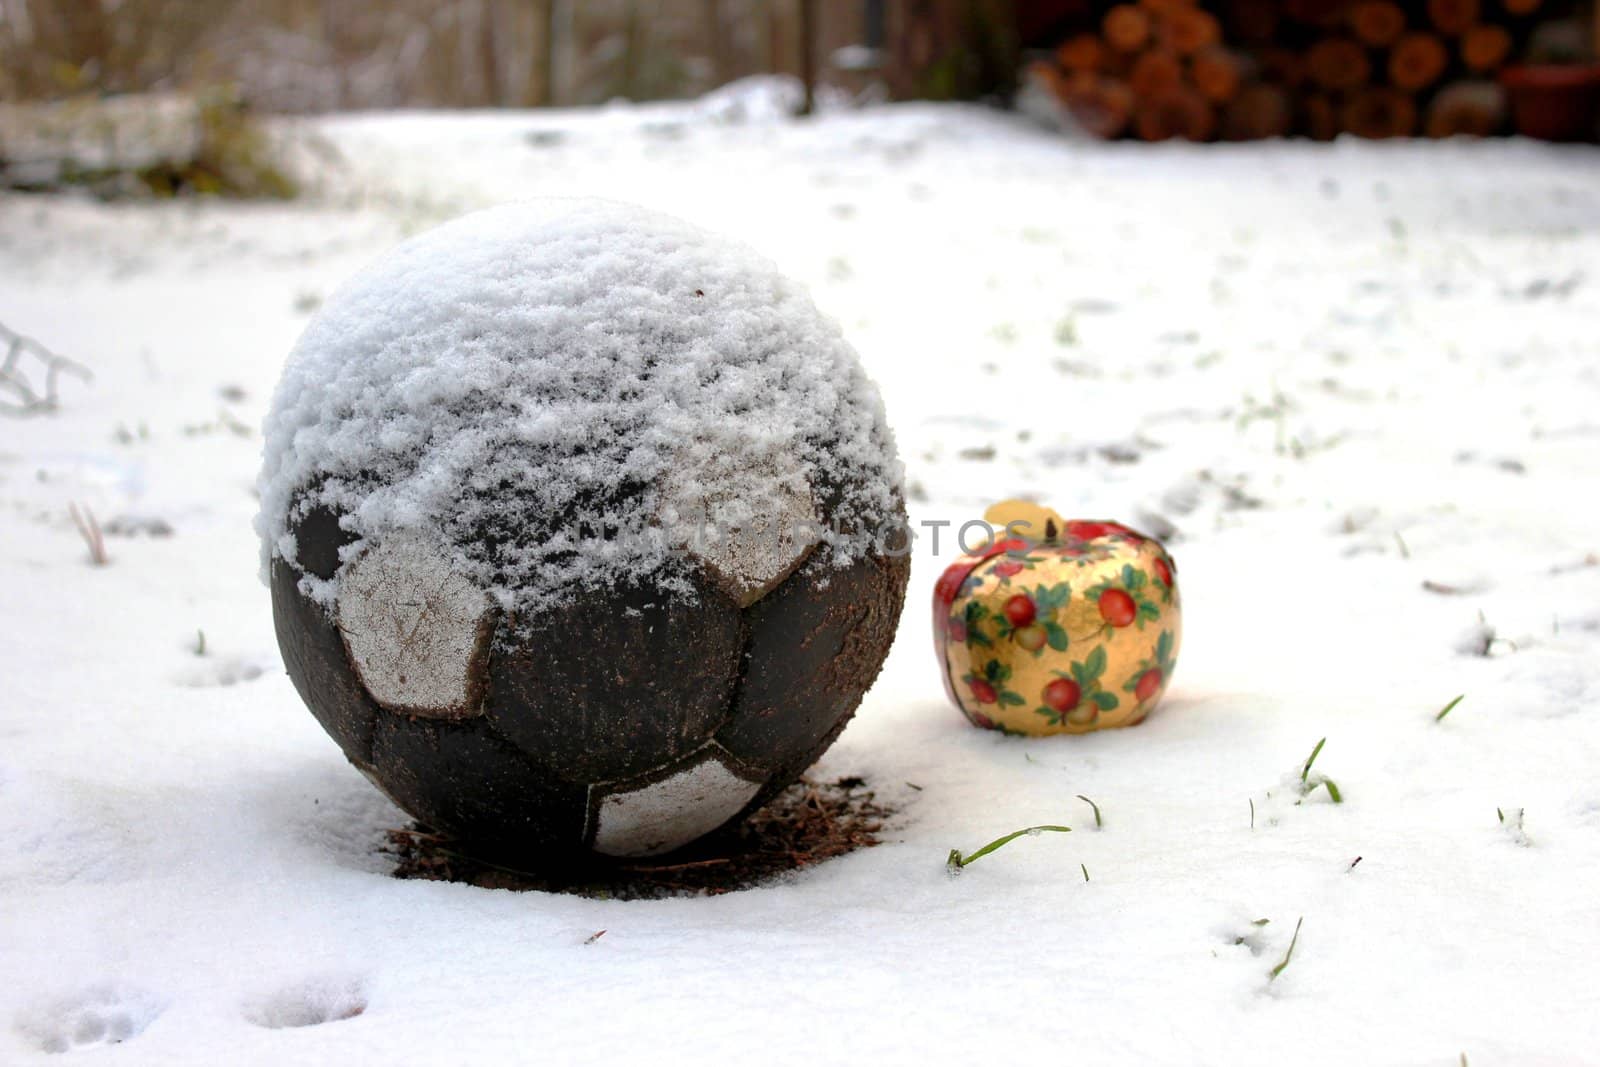 Beautifull Christmas apple and a soccer ball in the snow.